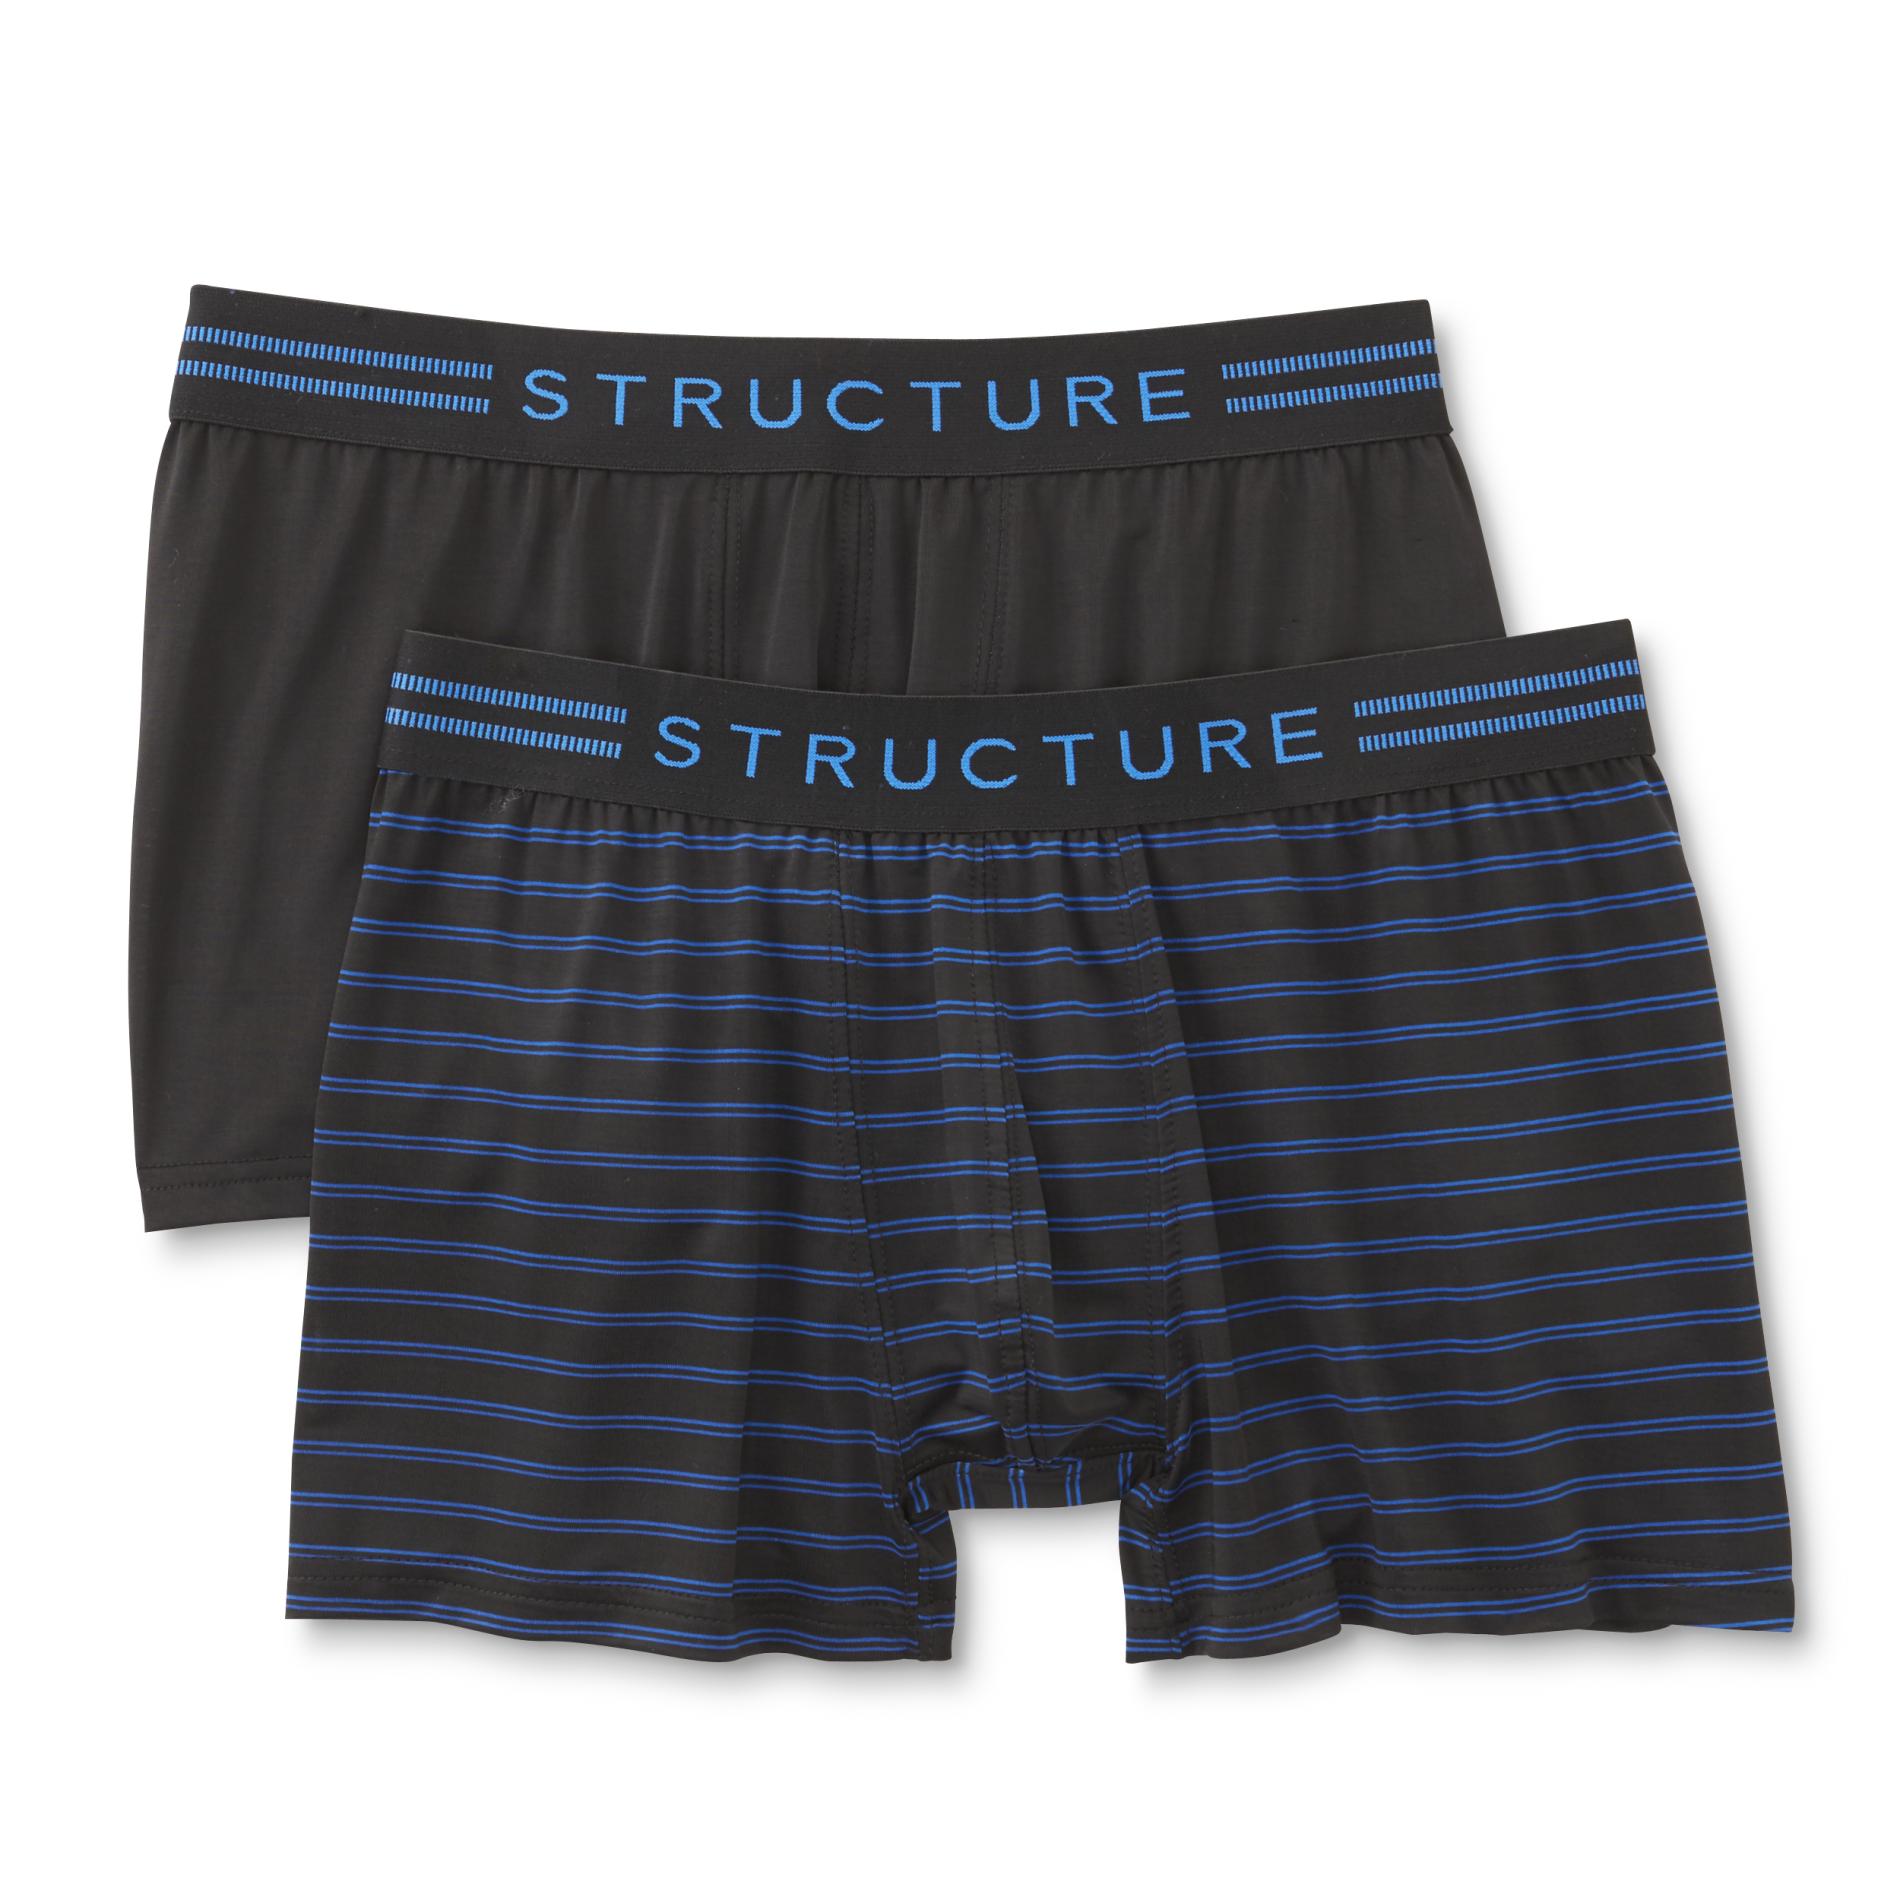 Structure Men's 2-Pairs Trunks - Striped